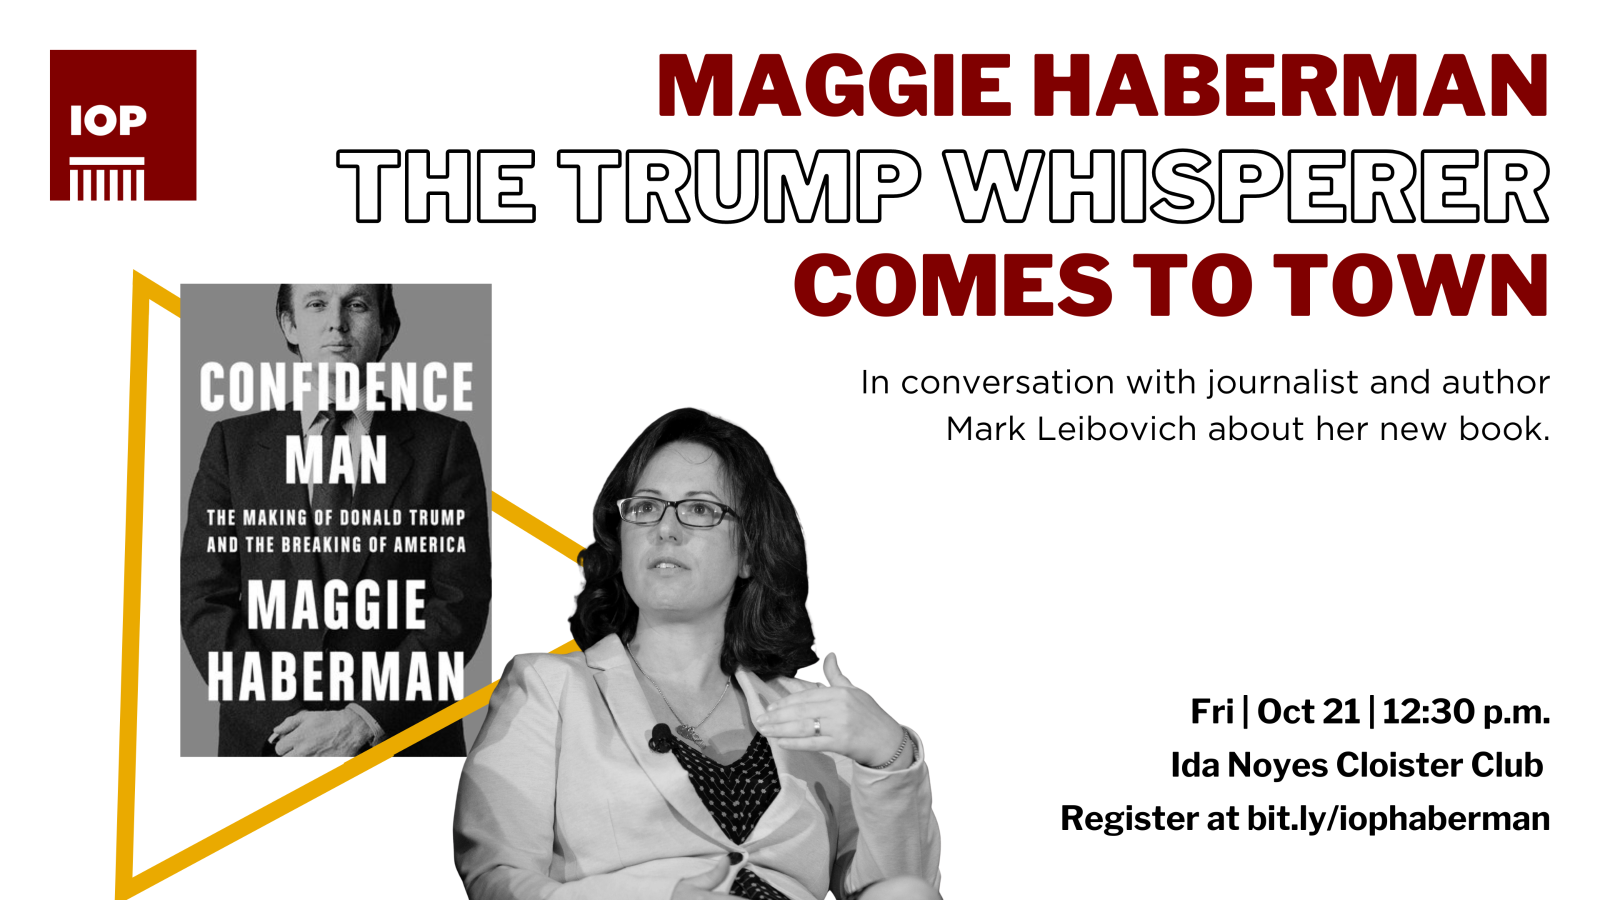 Maggie Haberman: The Trump Whisperer Comes to Town